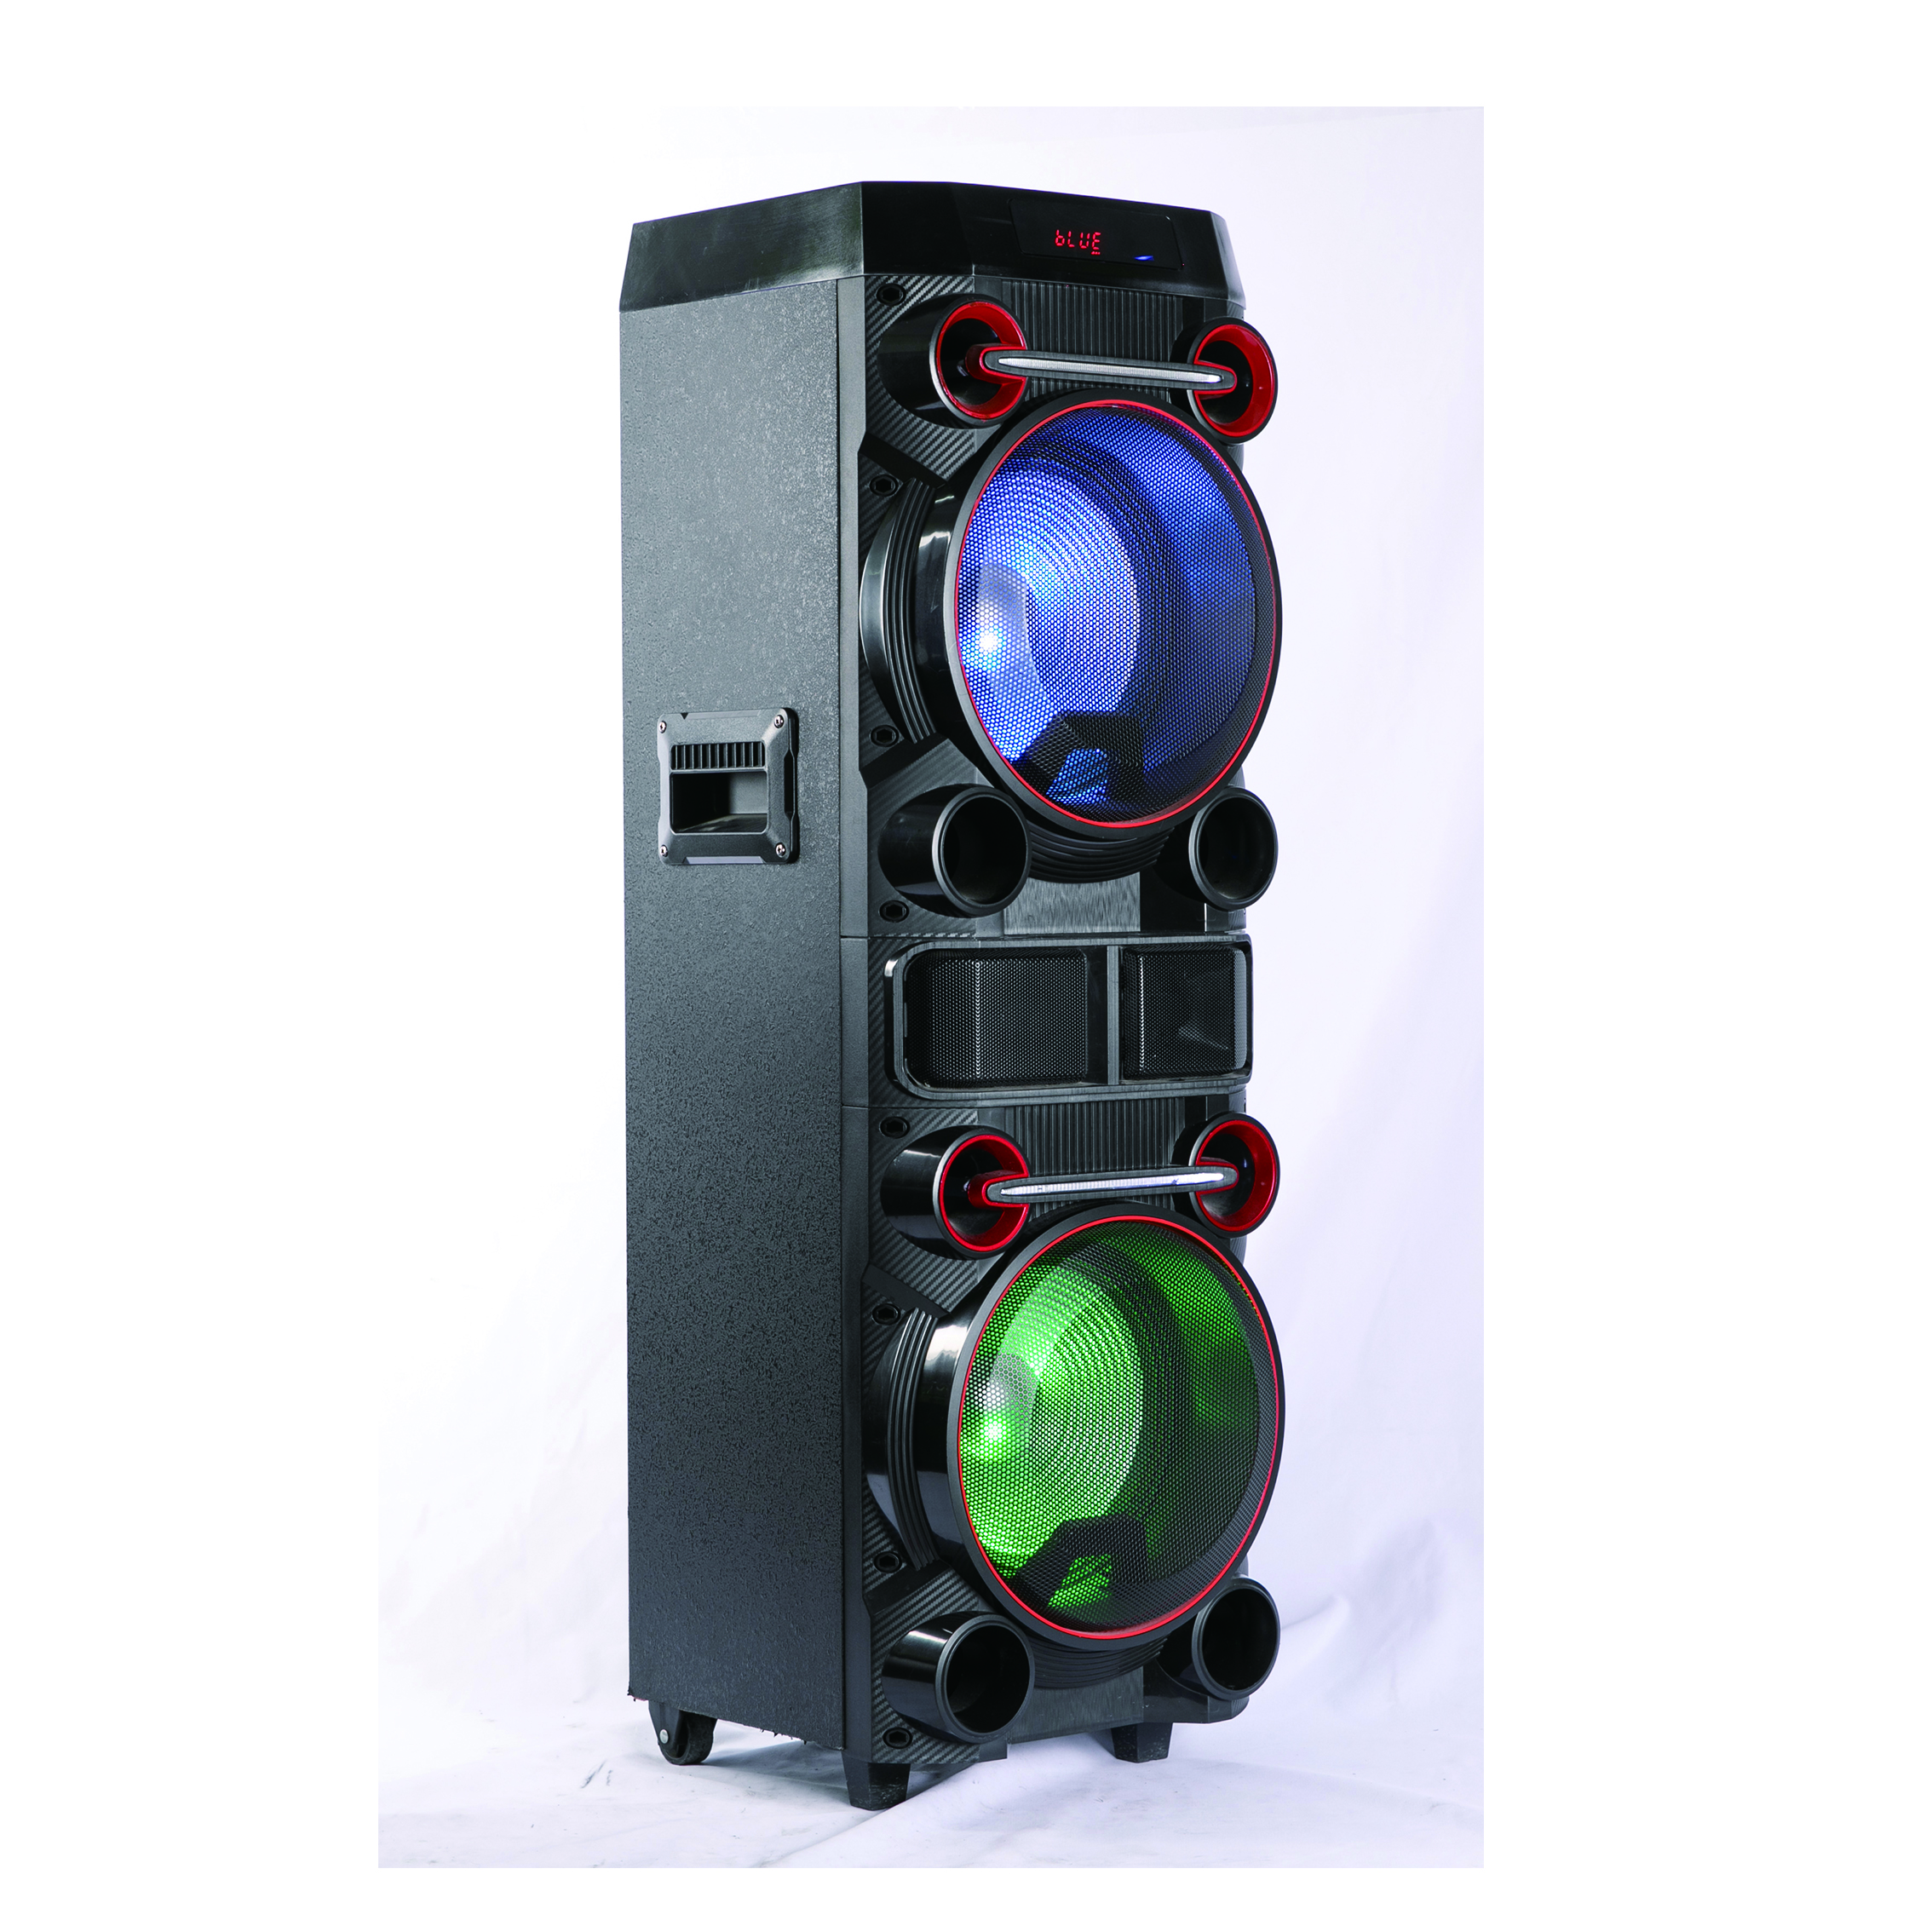 2.0 STAGE SPEAKER SUPER BASS WITH PRIVATE DESIGN